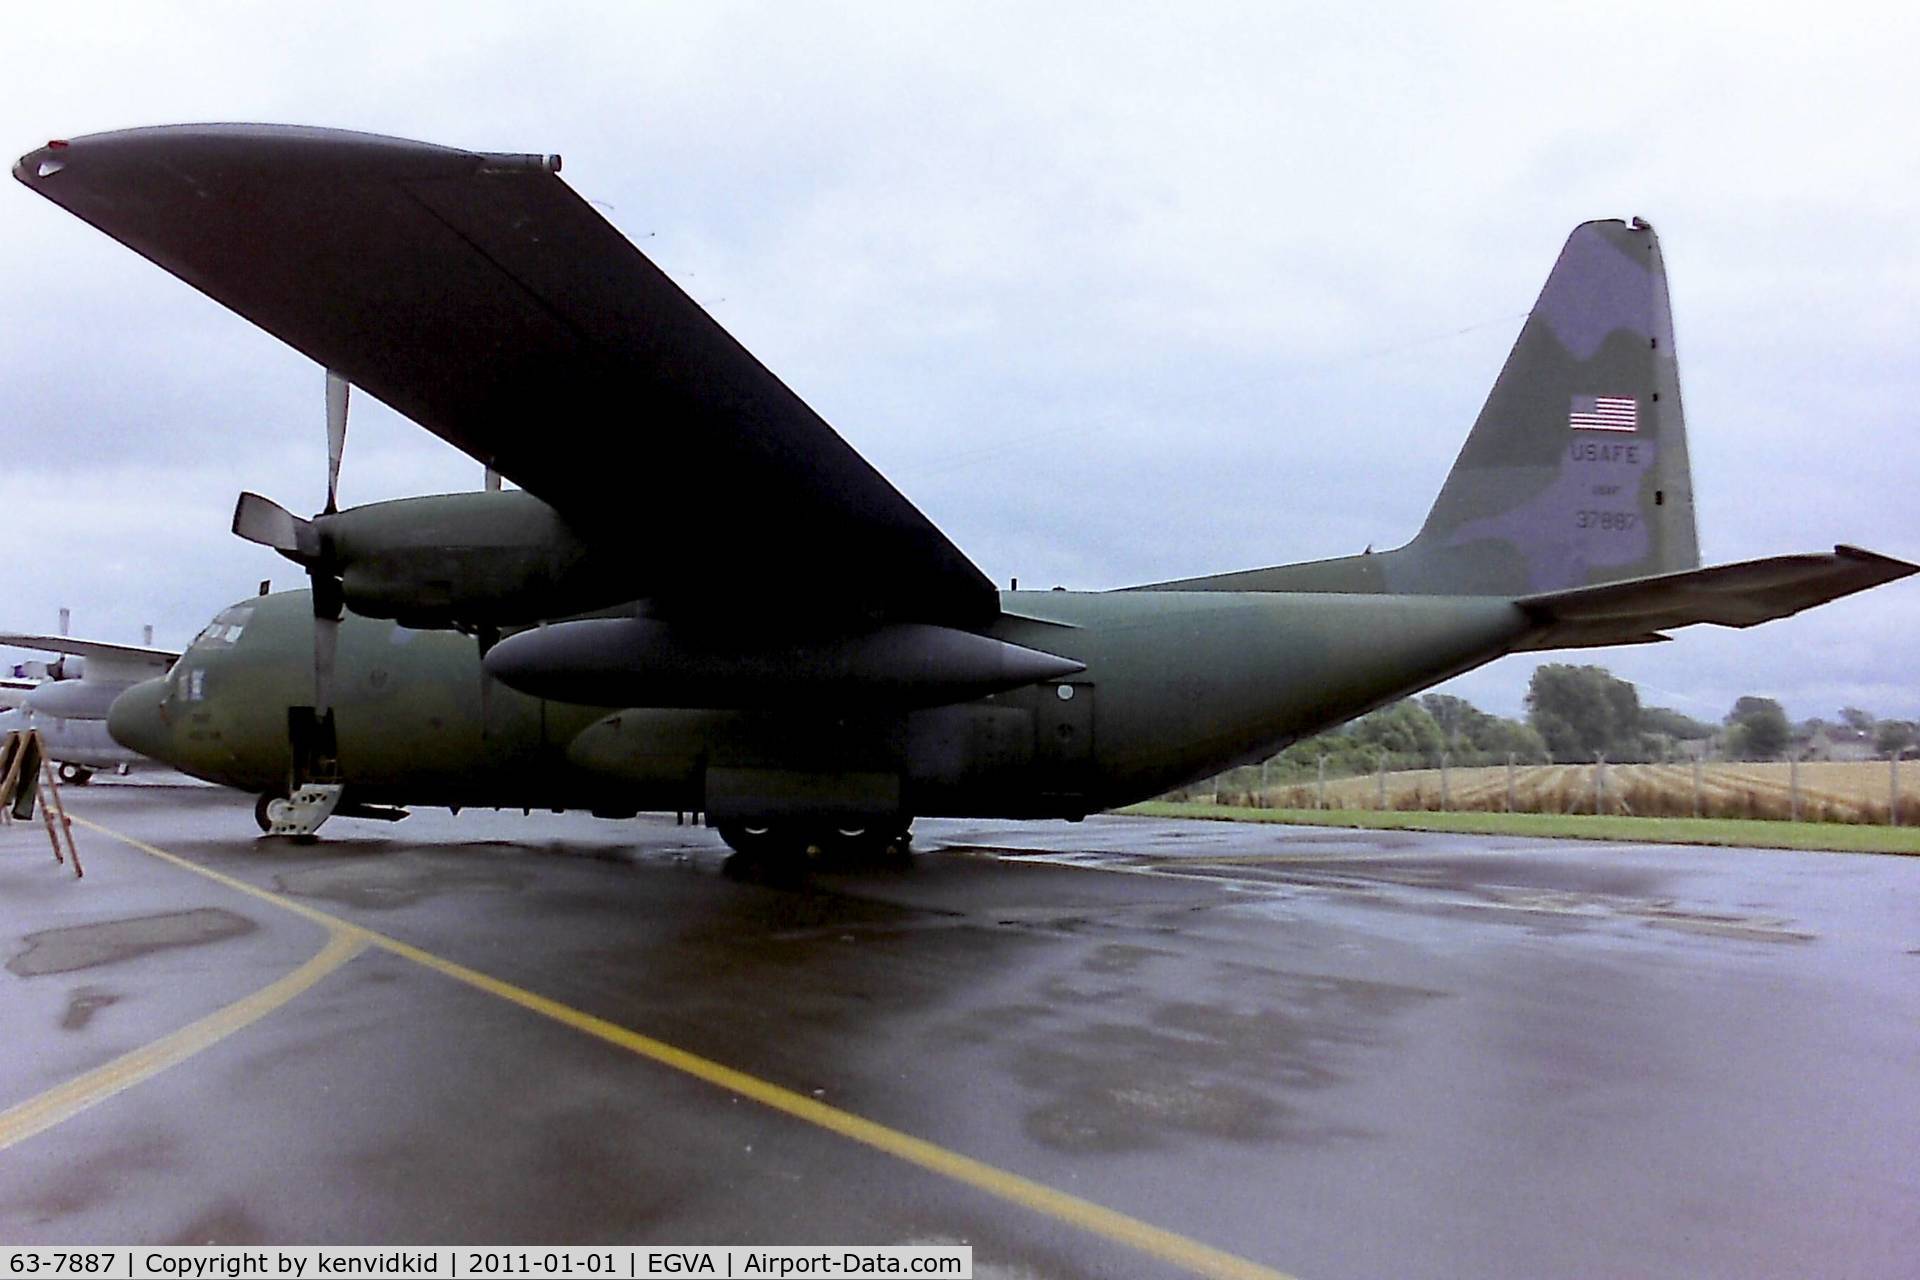 63-7887, 1964 Lockheed C-130E Hercules C/N 382-3958, At RIAT 1993, scanned from negative.